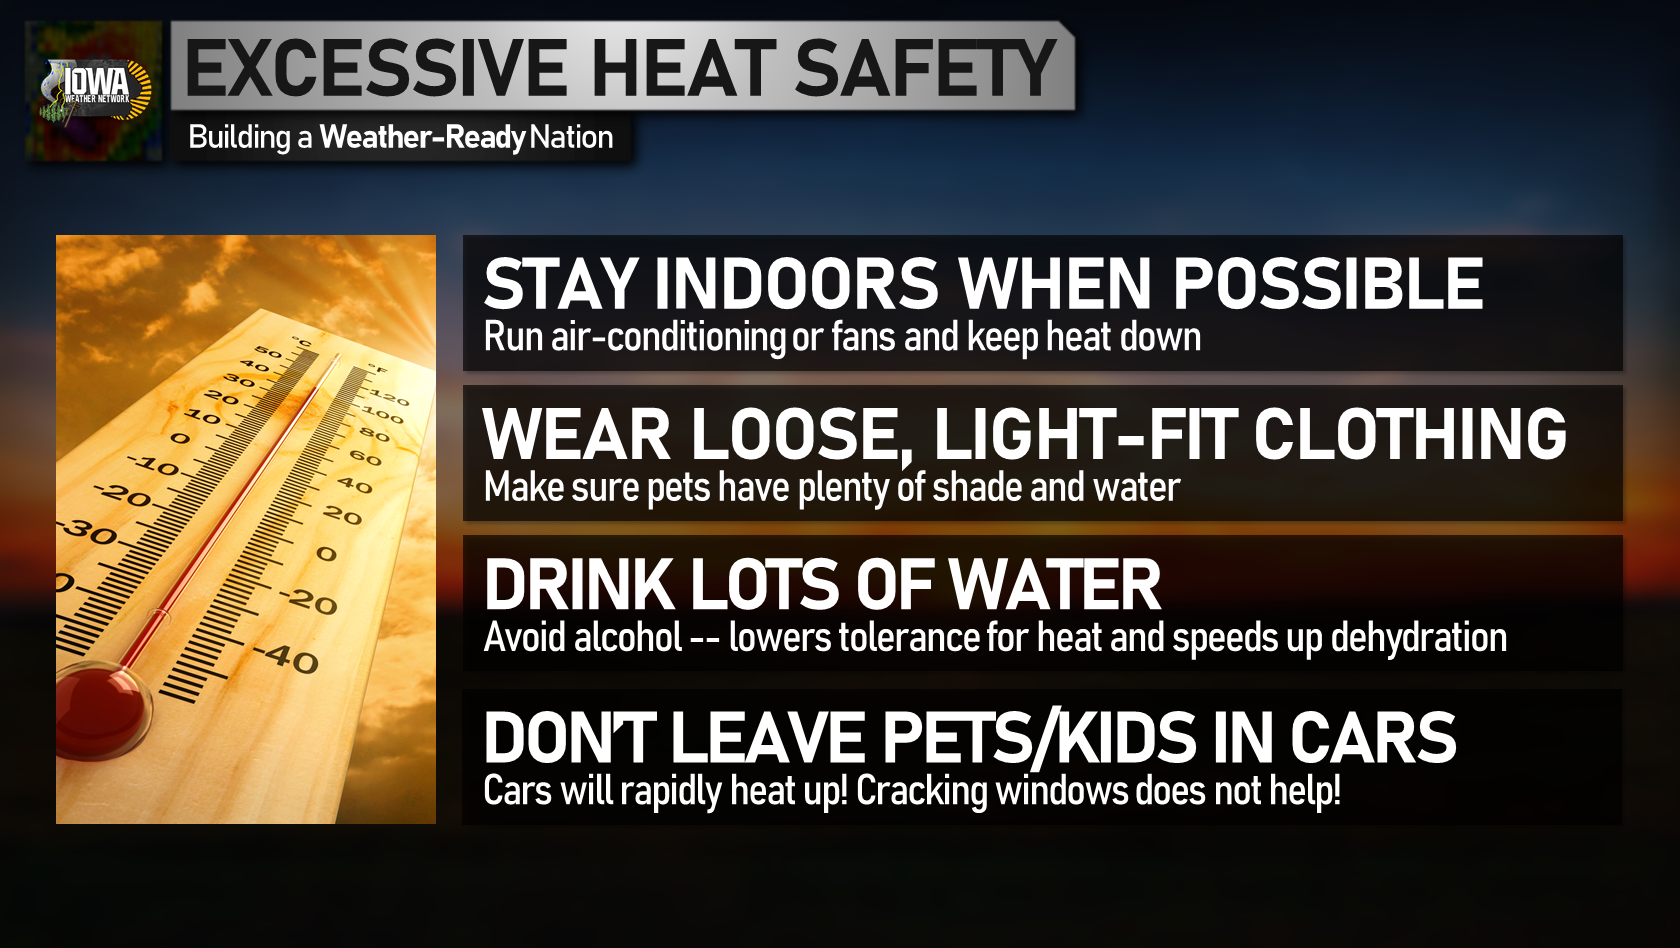 Excessive heat safety tips